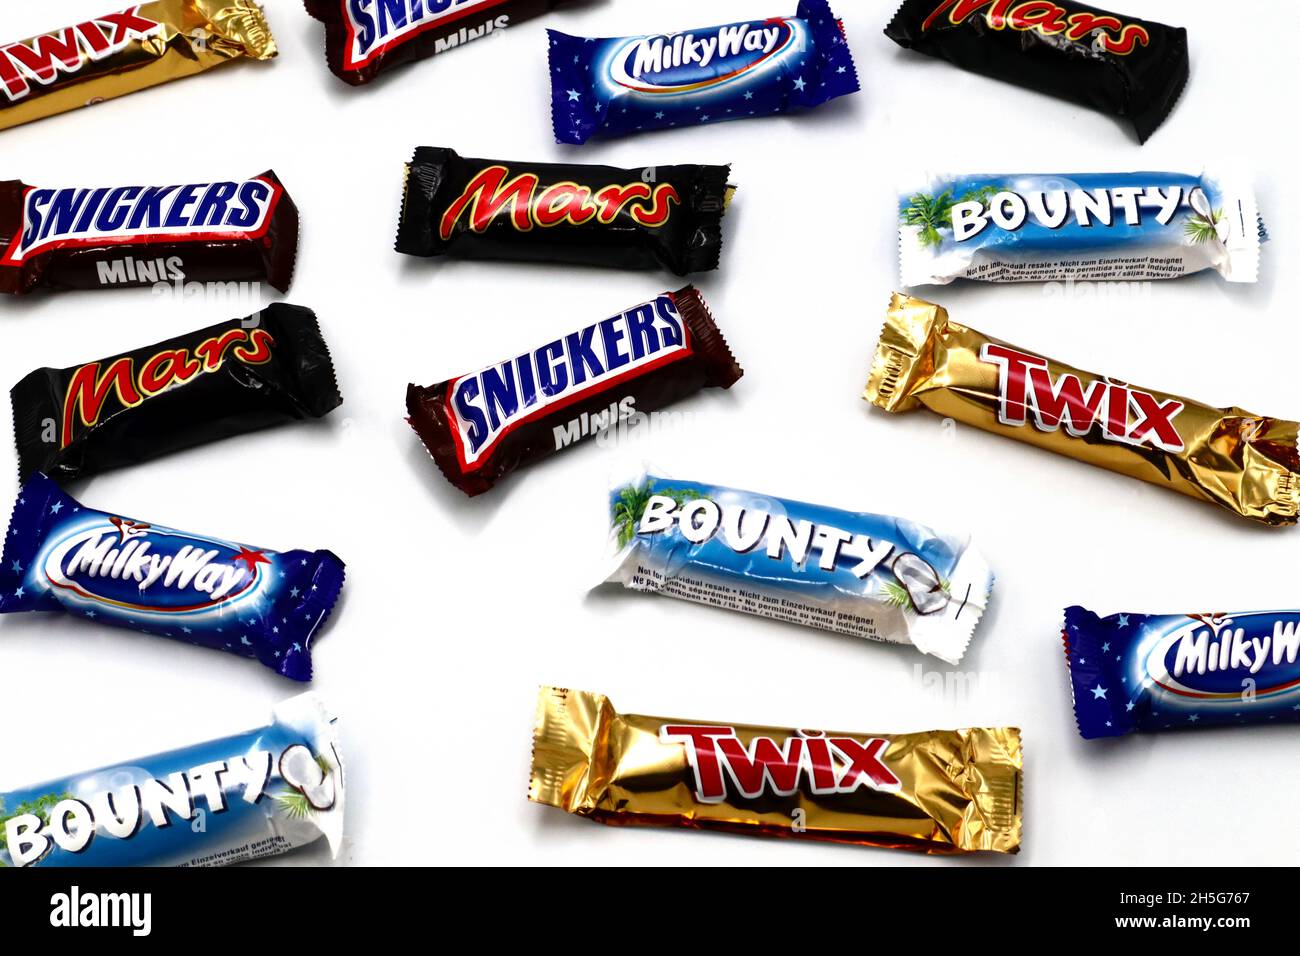 Snickers, Milky Photo Mars brands - Alamy chocolate Twix bars, of Bounty, Incorporated Way and Mars, Stock